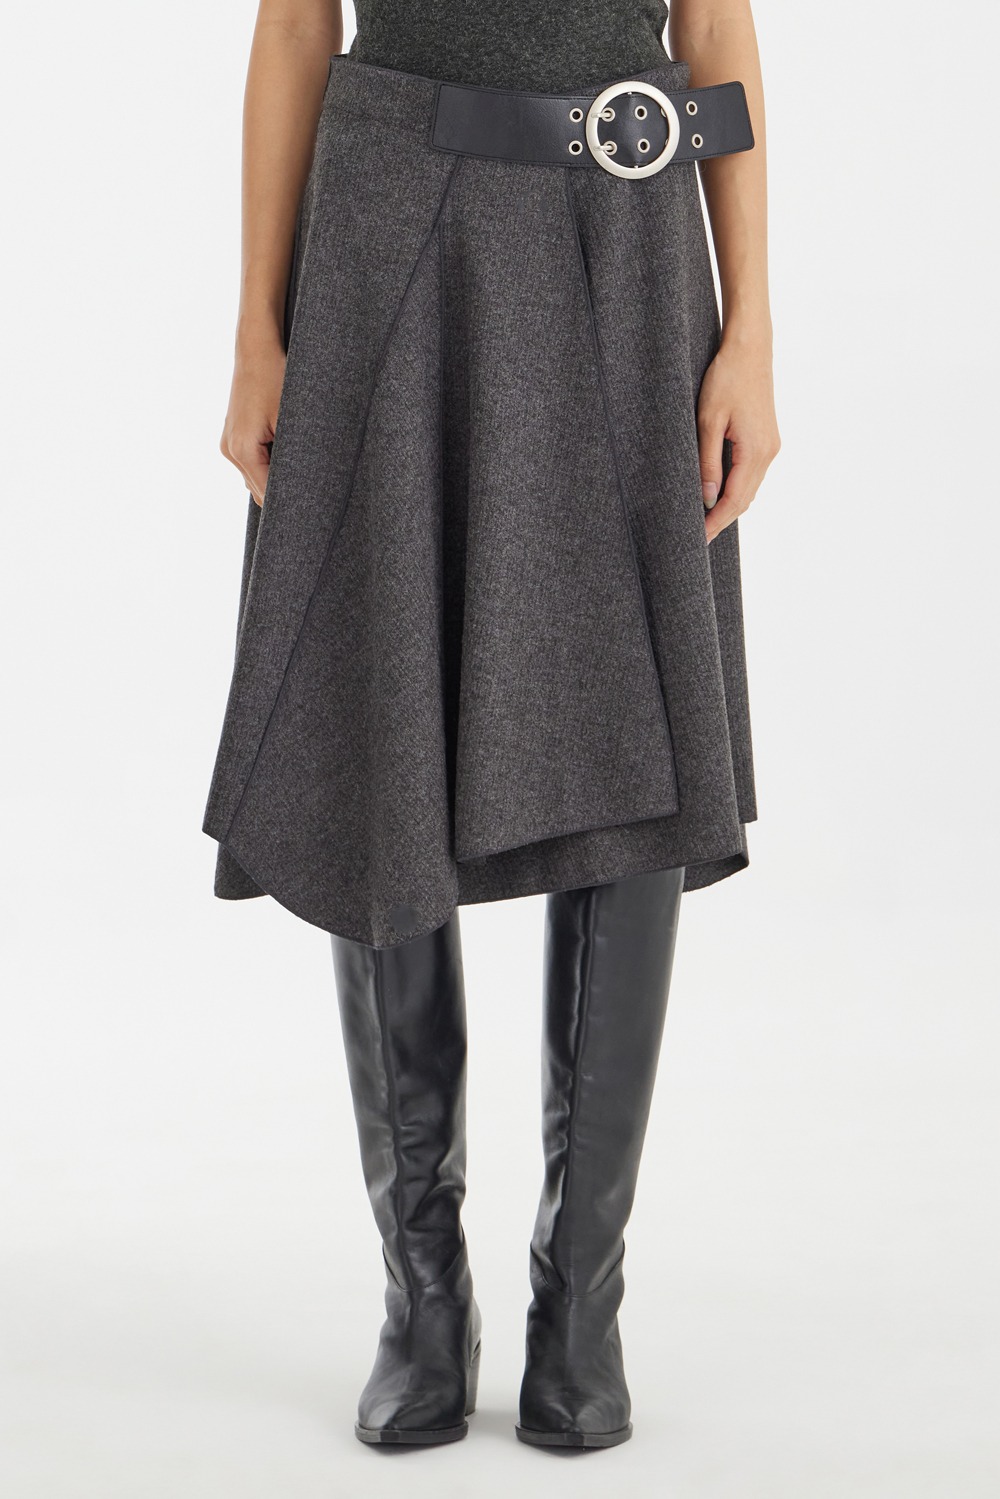 Belt Wrapped Skirt - Charcoal